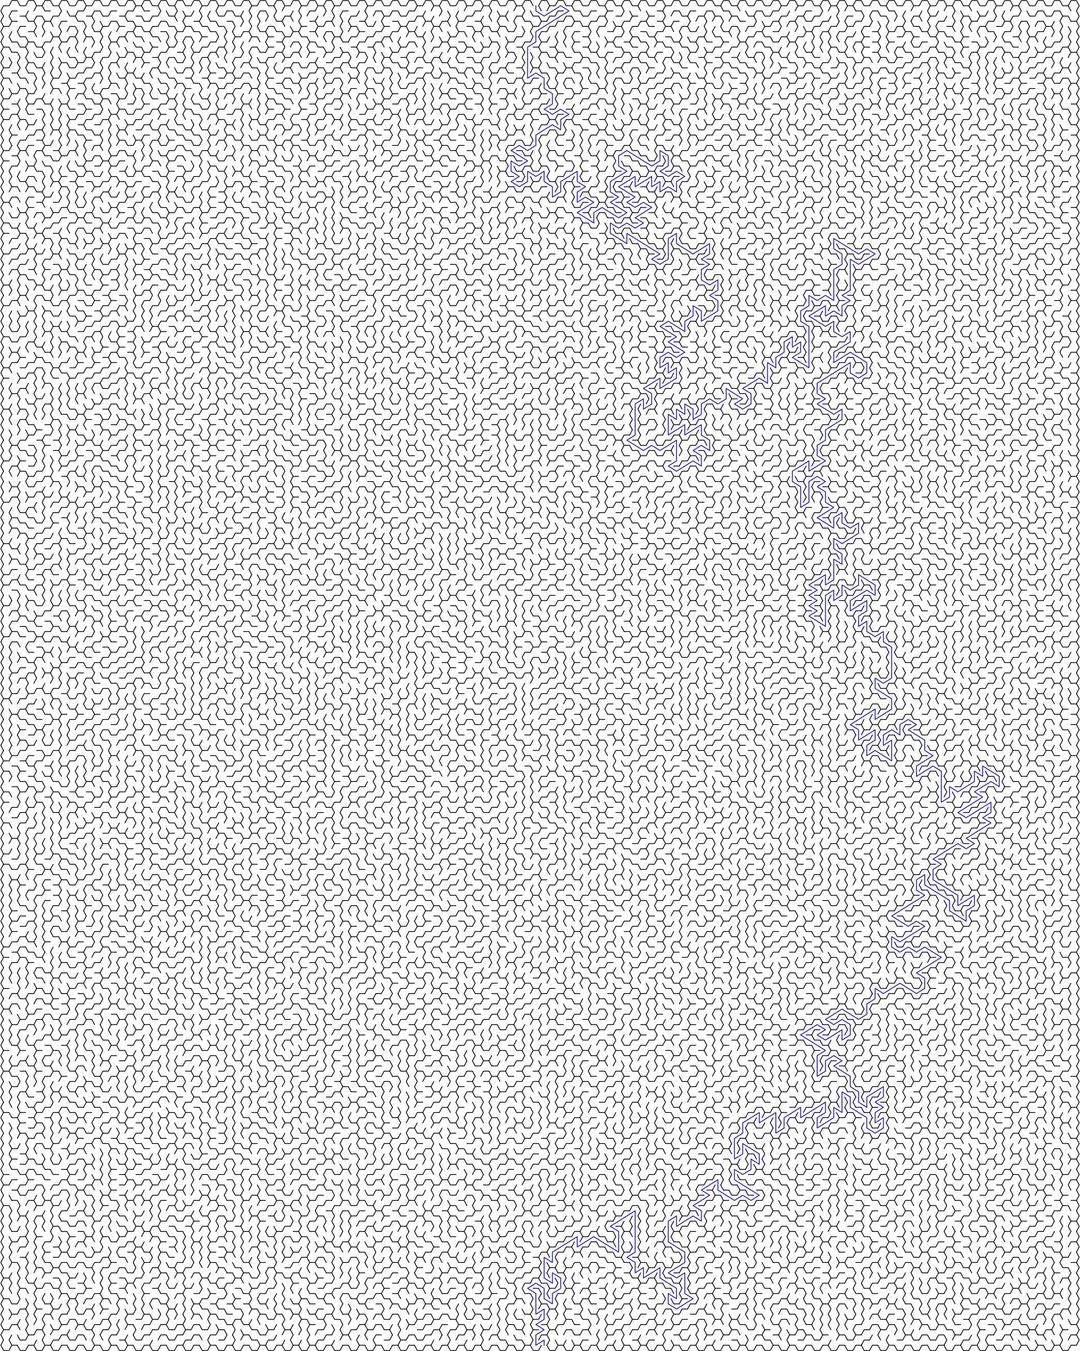 Realm Of The Lost Daily Sketch 22 png transparent